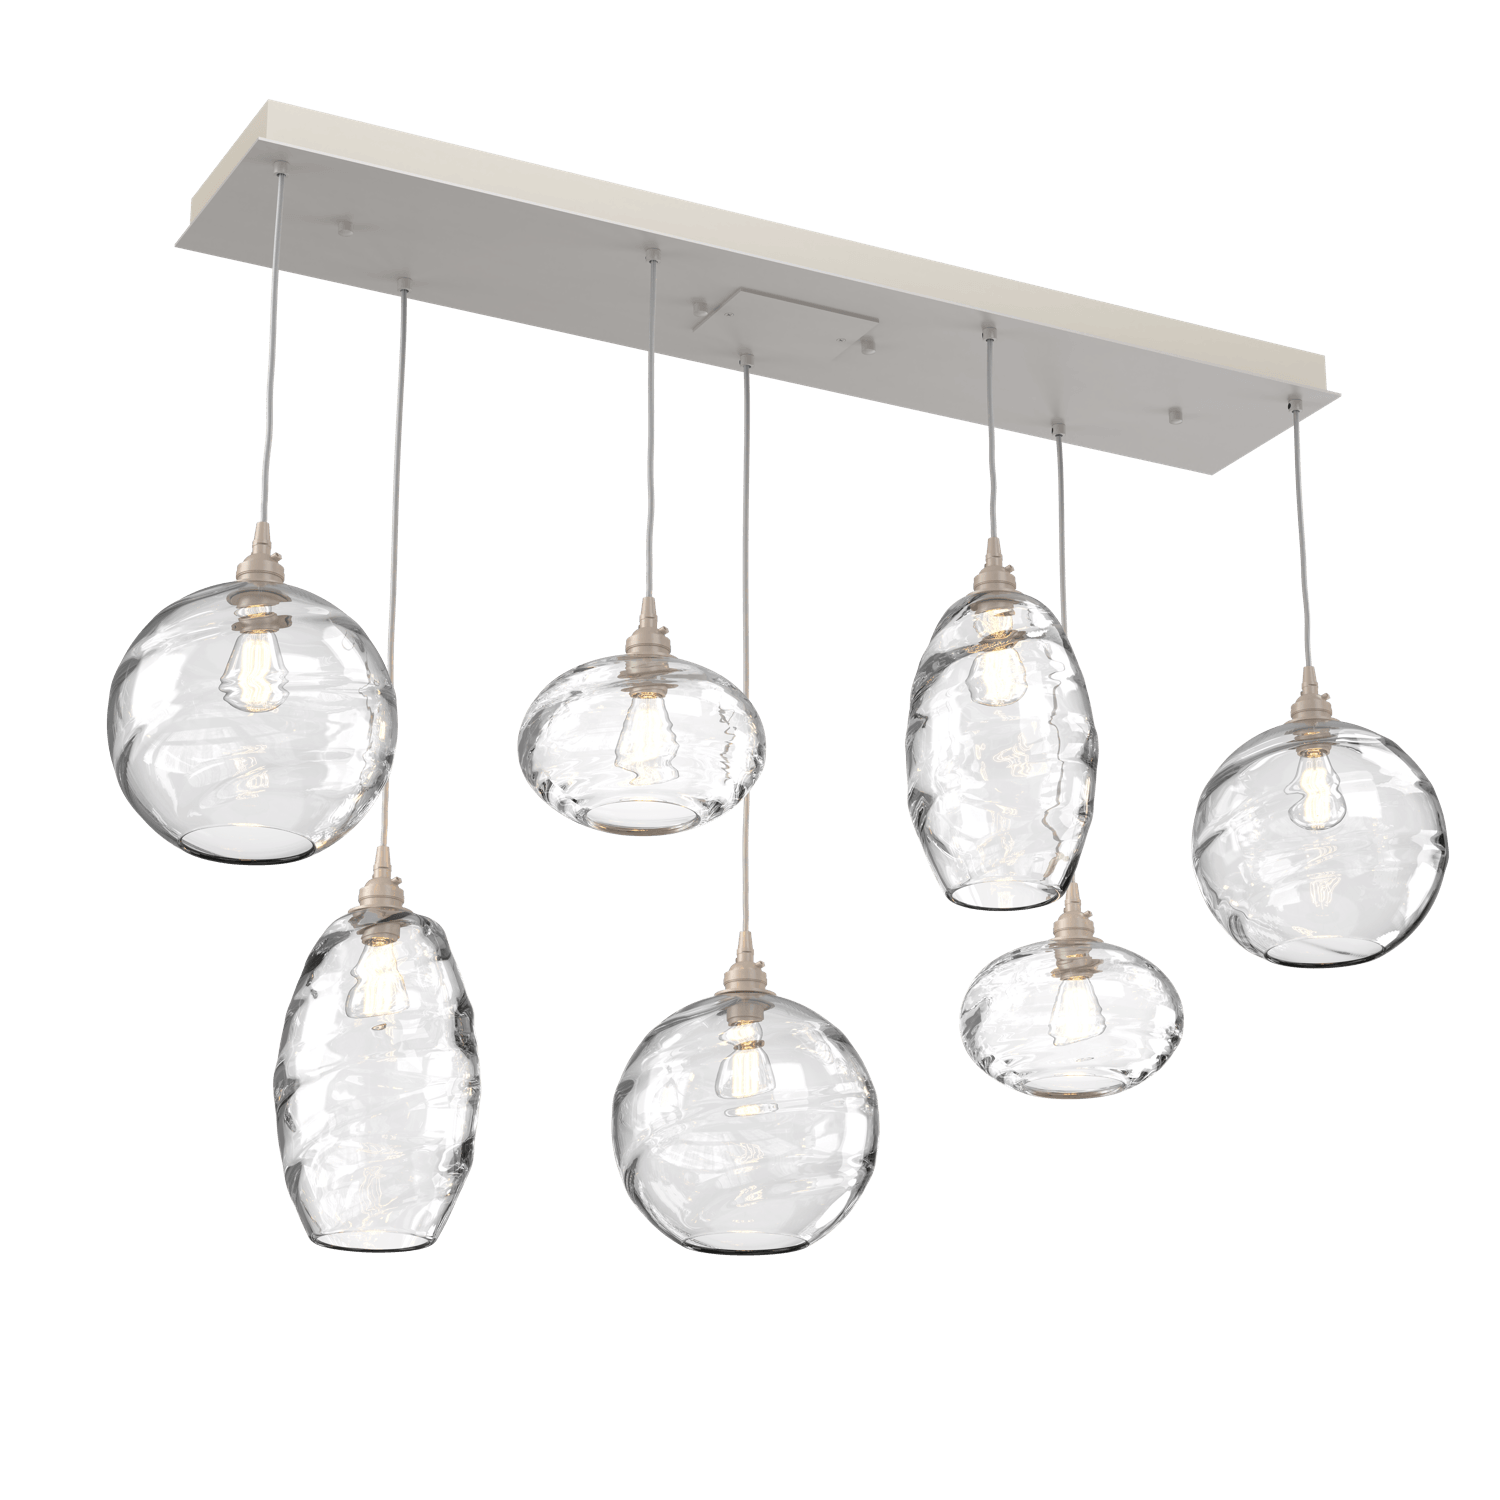 PLB0048-07-BS-OC-Hammerton-Studio-Optic-Blown-Glass-Misto-7-light-linear-pendant-chandelier-with-metallic-beige-silver-finish-and-optic-clear-blown-glass-shades-and-incandescent-lamping